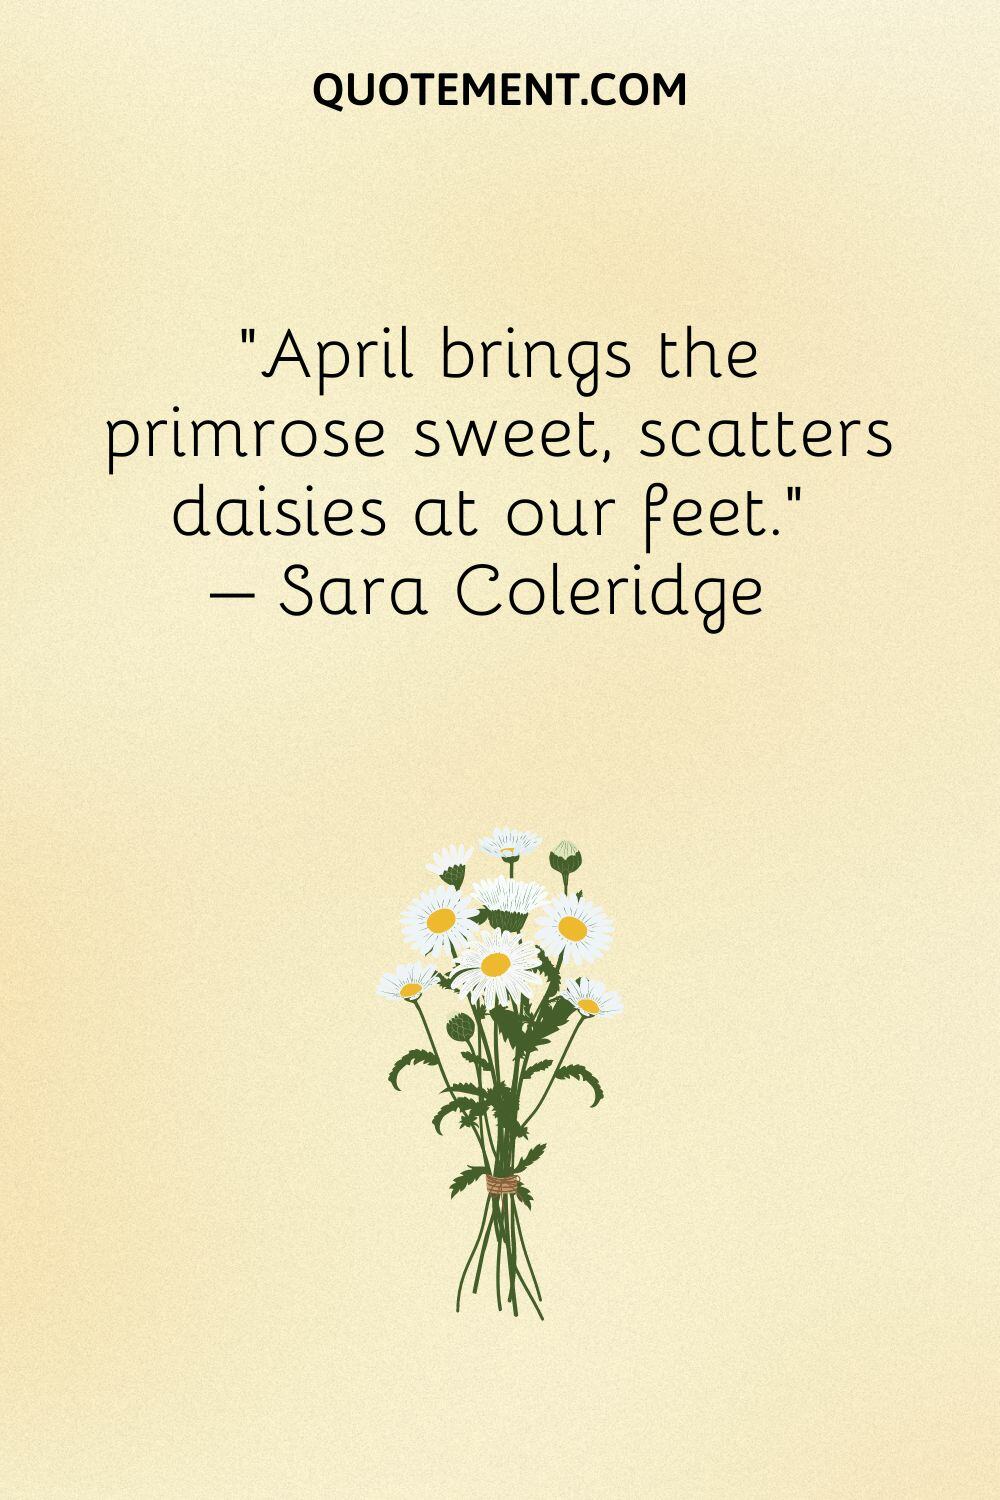 April brings the primrose sweet, scatters daisies at our feet.